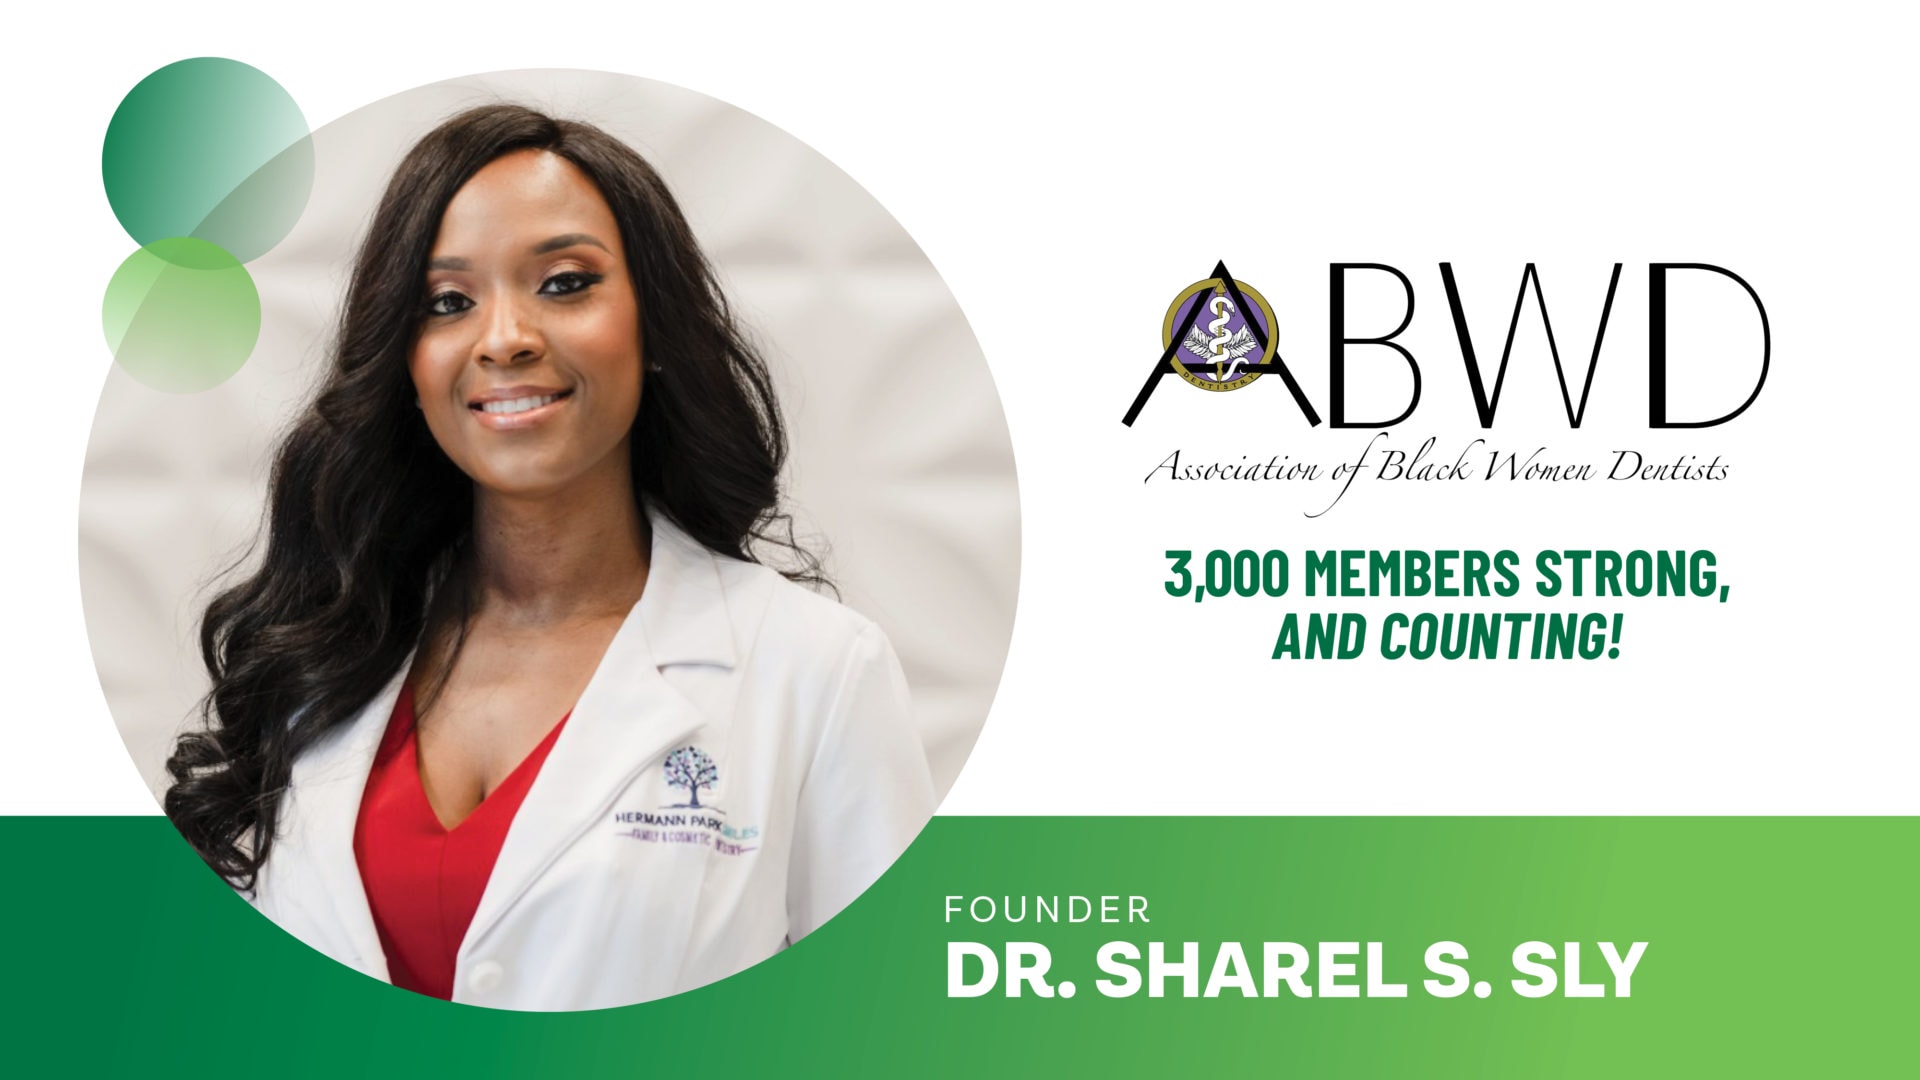 Headshot of Dr. Sharel S. Sly in a white dentist's coat over a red shirt, smiling at the camera next to a logo for her organization: Association of Black Women Dentists.